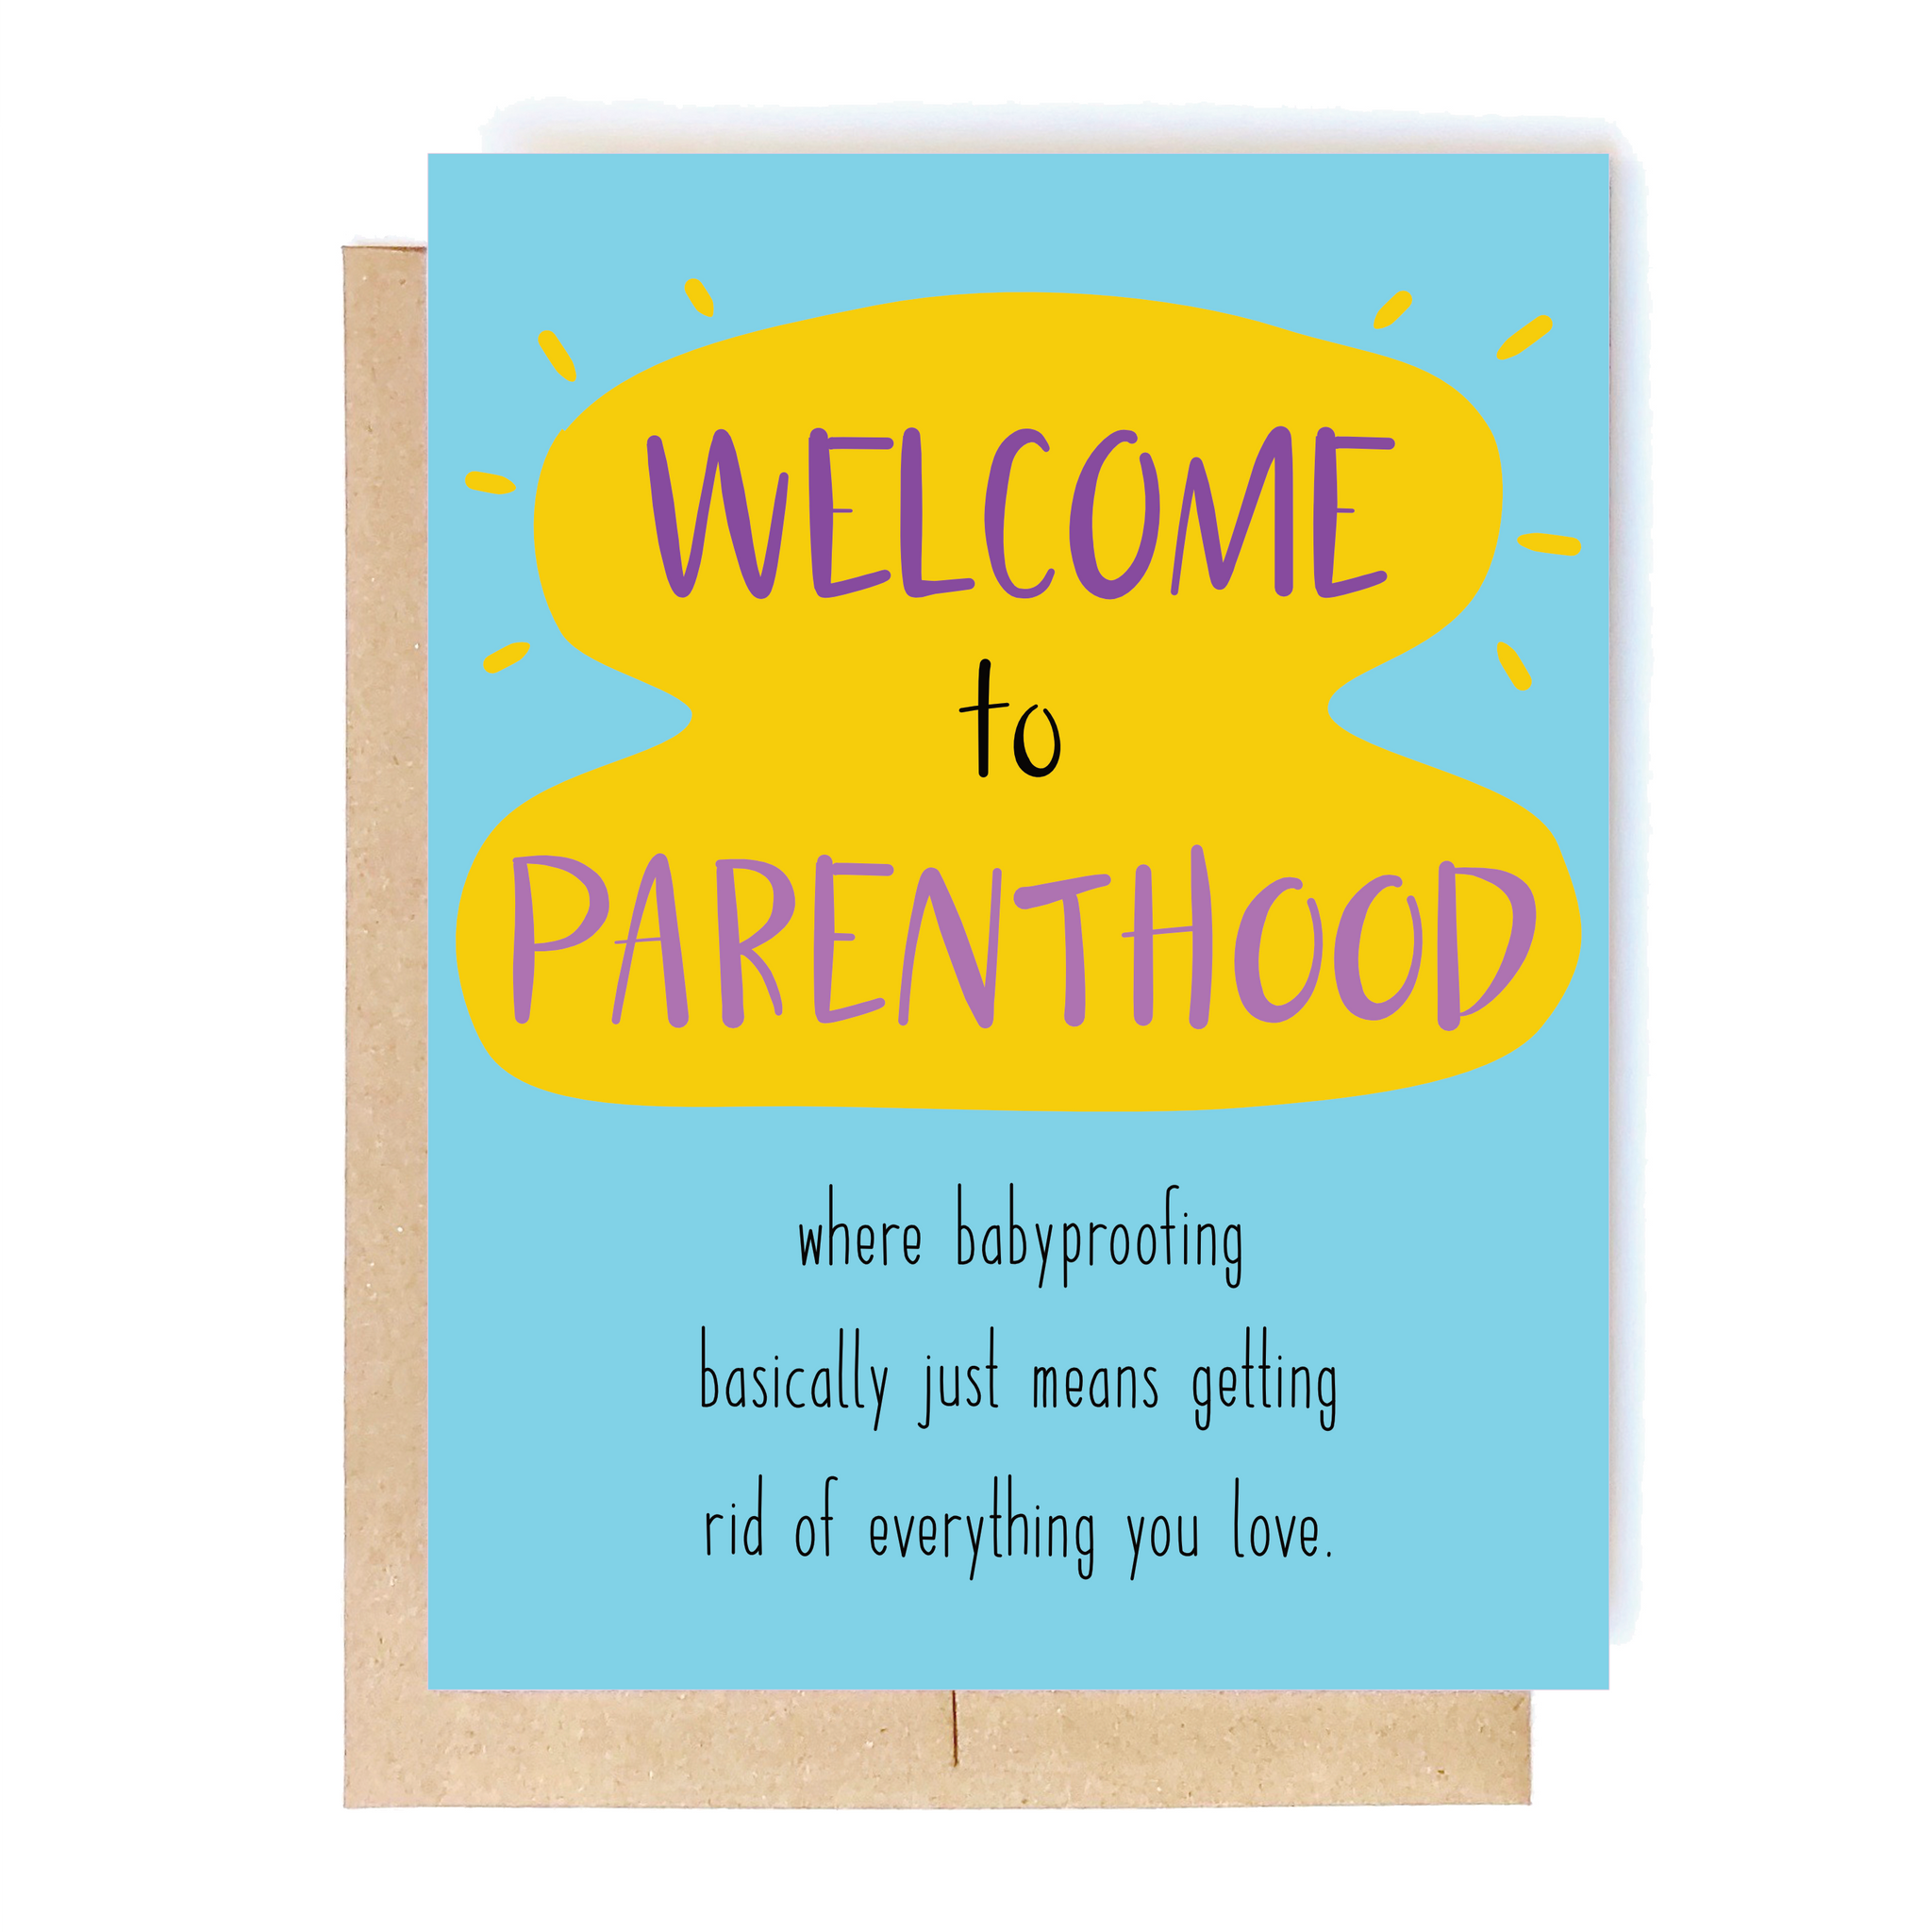 Card front: Welcome to parenthood. Where babyproofing basically just means getting rid of everything you love.